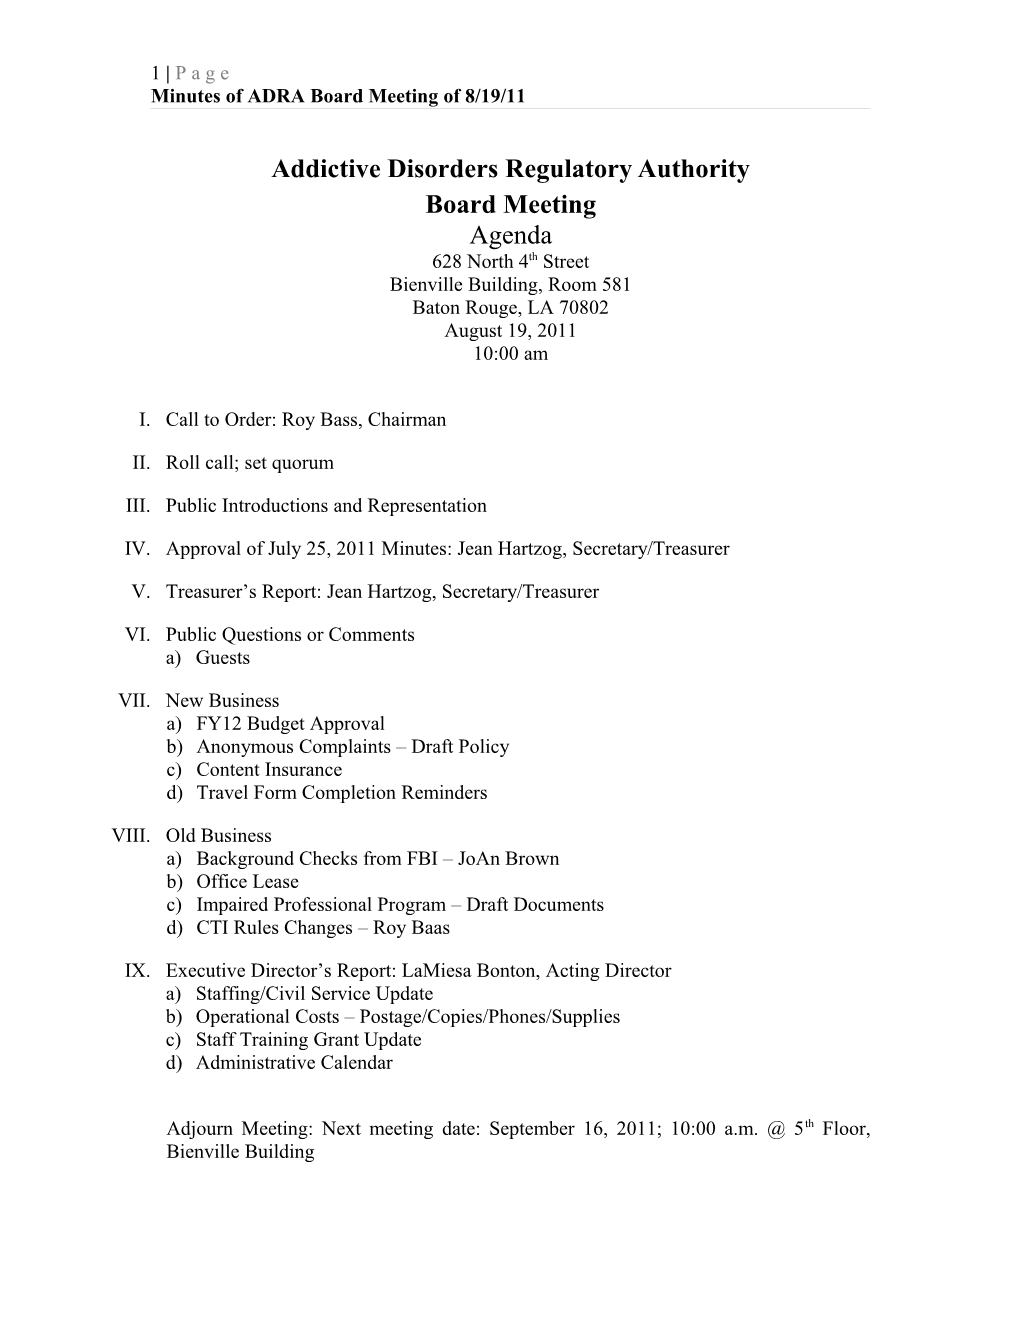 Minutes of ADRA Board Meeting of 8/19/11